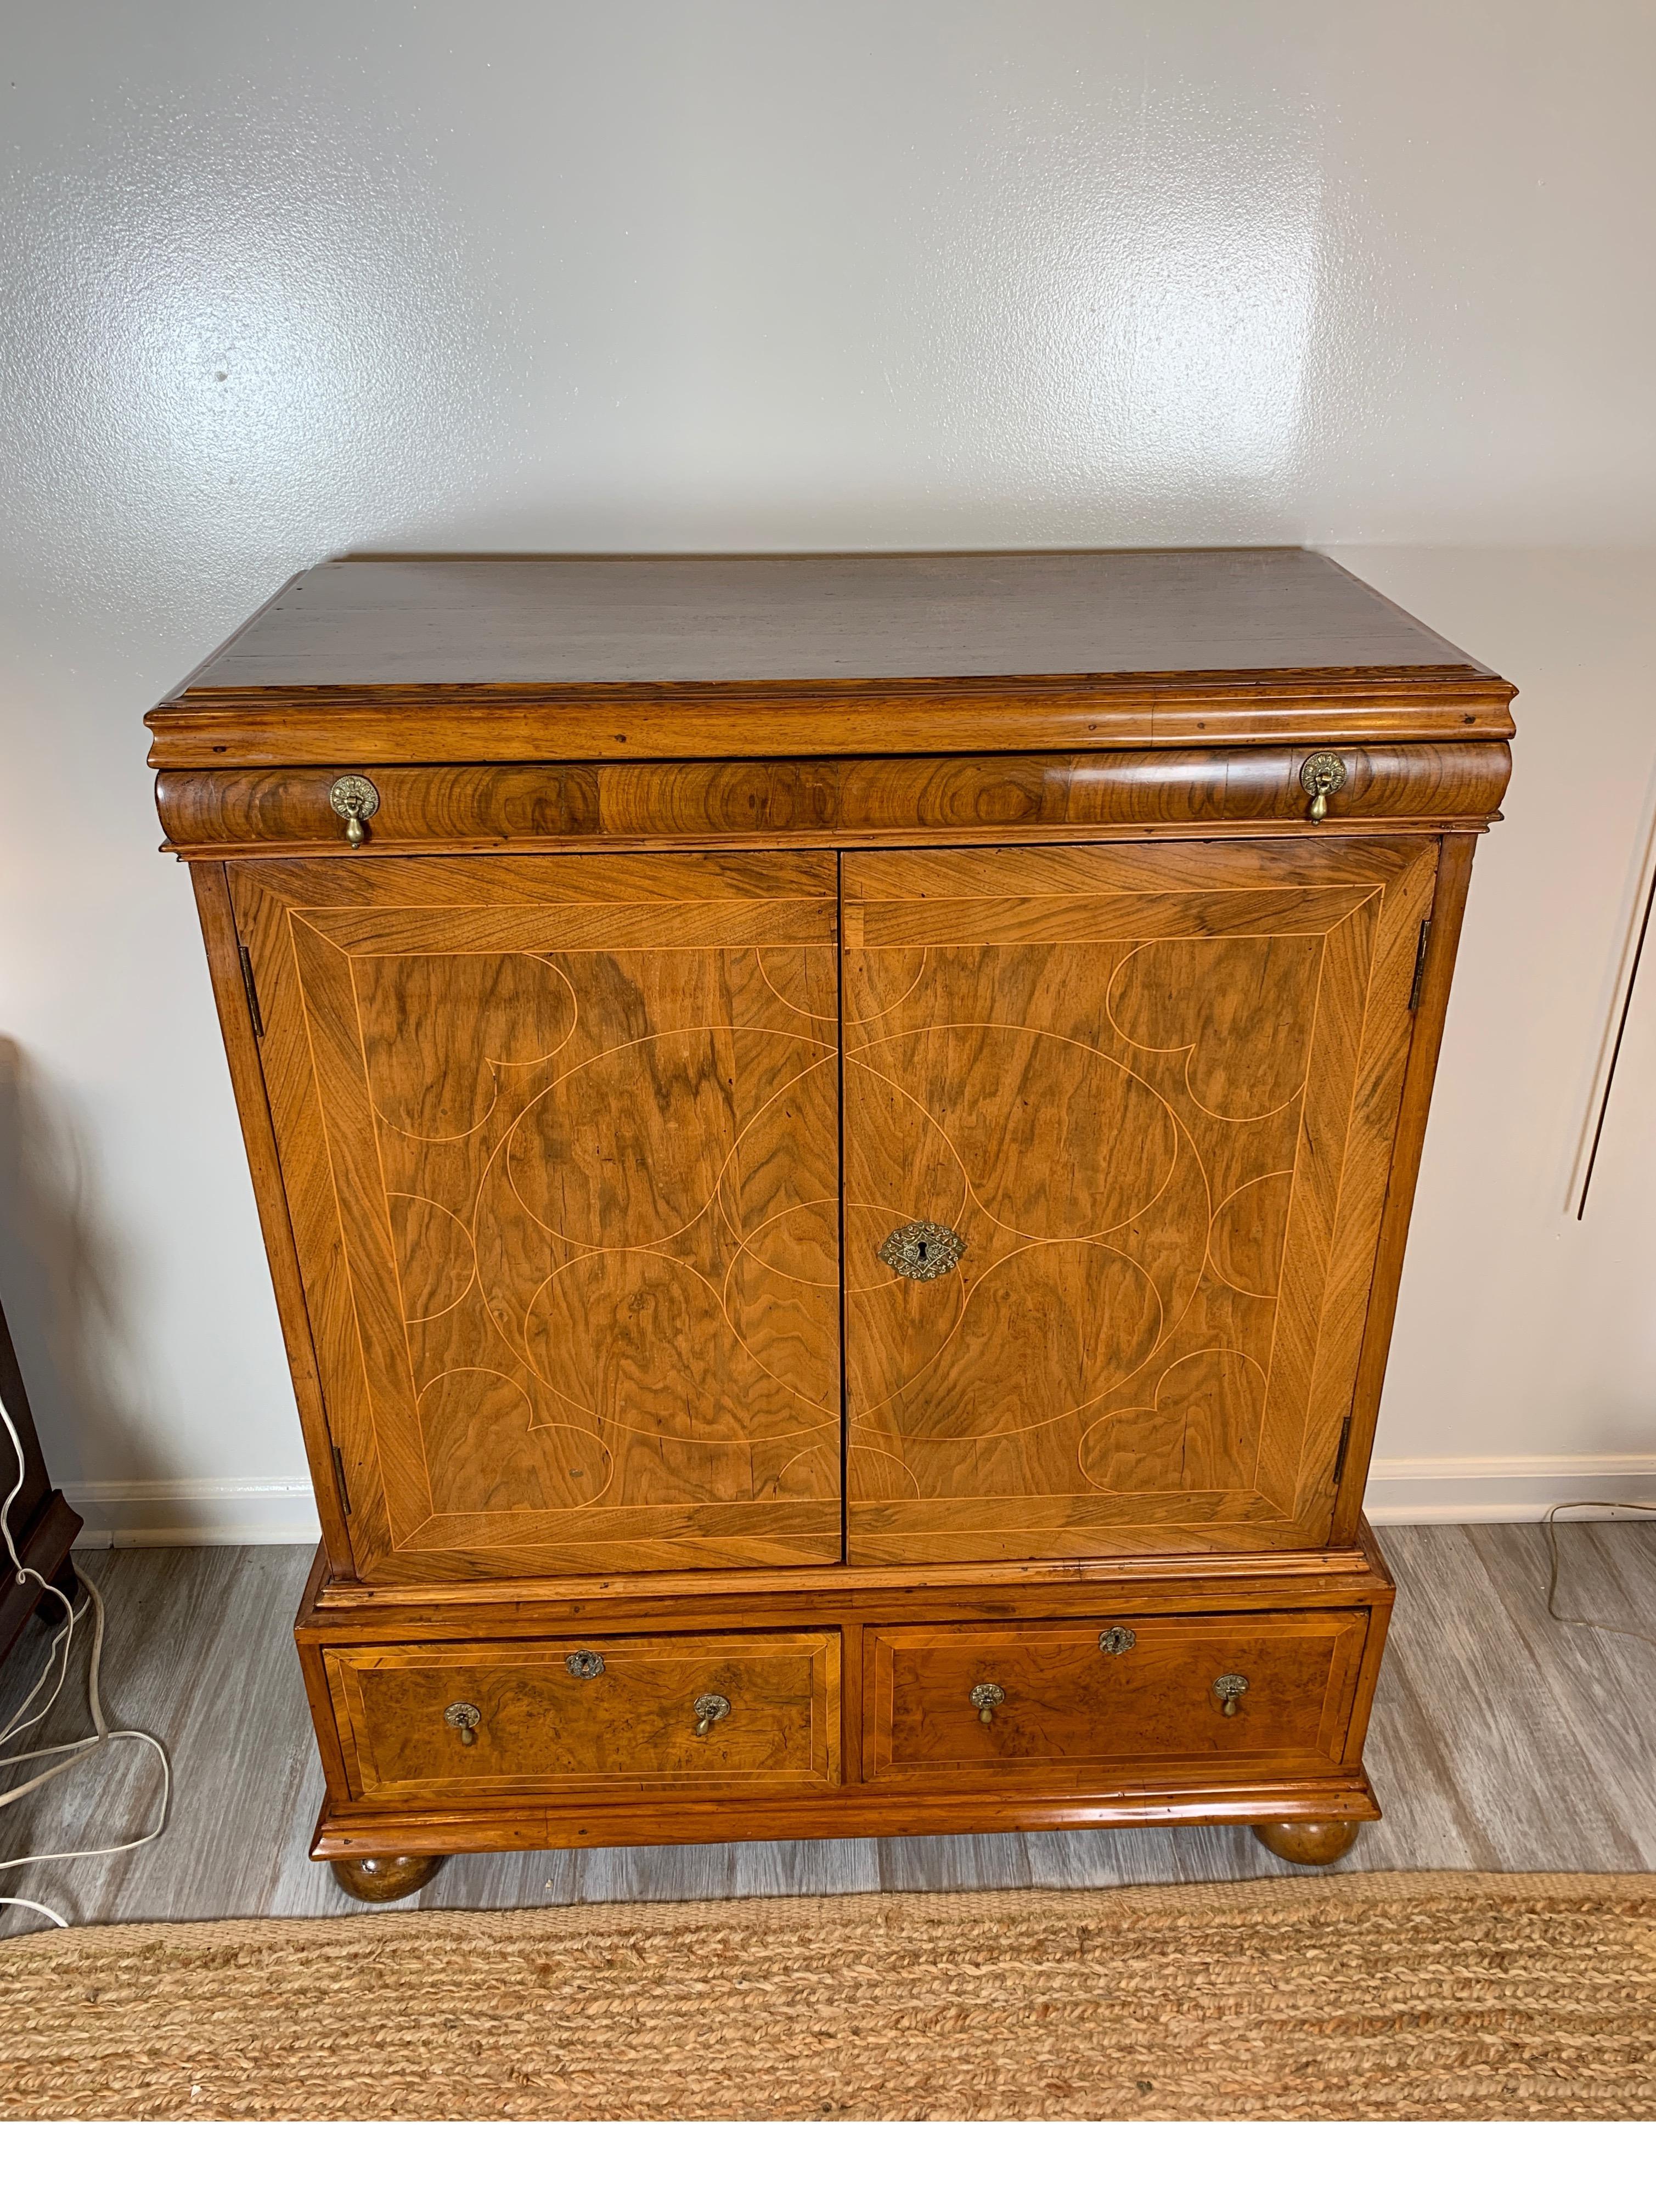 18th century English inlaid cabinet-on-stand, walnut, satinwood and oak
in very nice condition with many compartments and drawers.
A very nice piece of early handcrafted furniture
Dimensions: 49